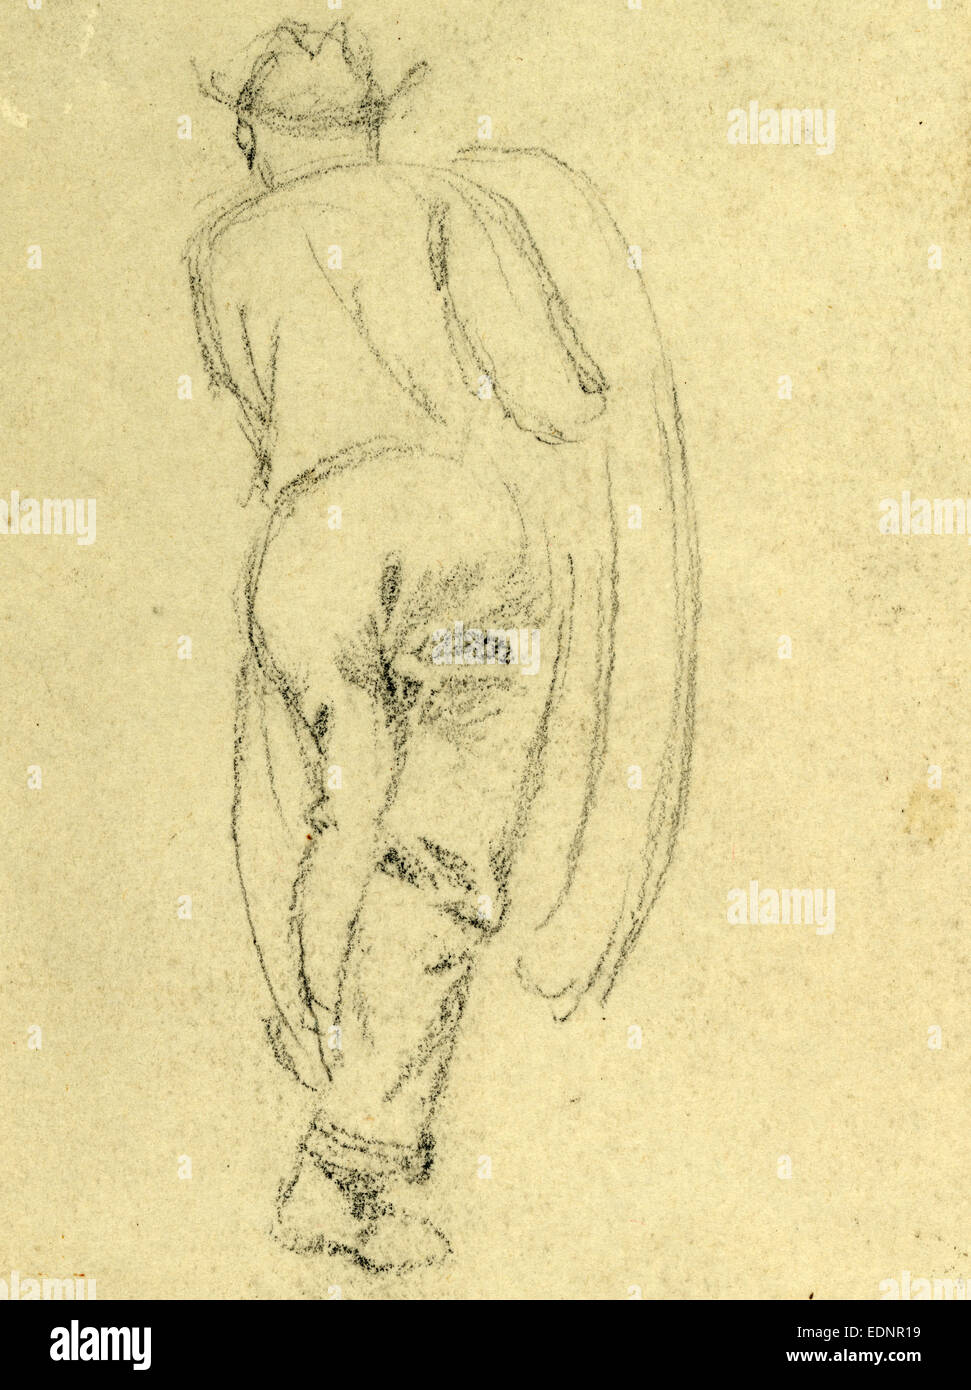 Full length rear view of man, between 1860 and 1865, drawing on white paper pencil, 9.2 x 6.6 cm. (sheet), 1862-1865, by Alfred R Waud, 1828-1891, an american artist famous for his American Civil War sketches, America, US Stock Photo